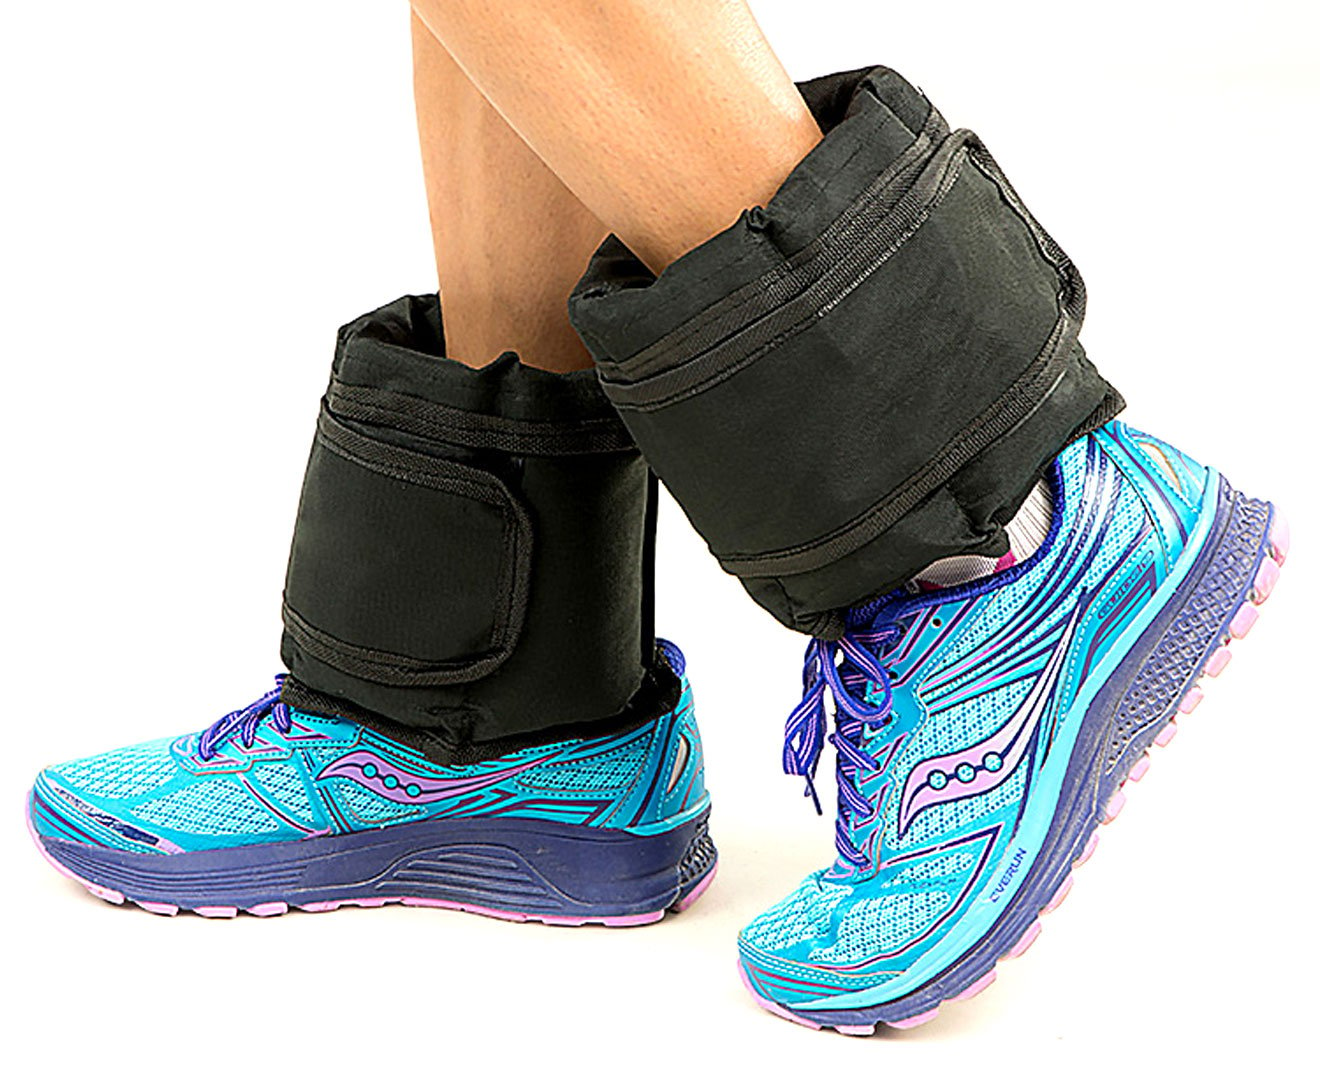 2x 2.5kg Adjustable Ankle Exercise Running Weights 2